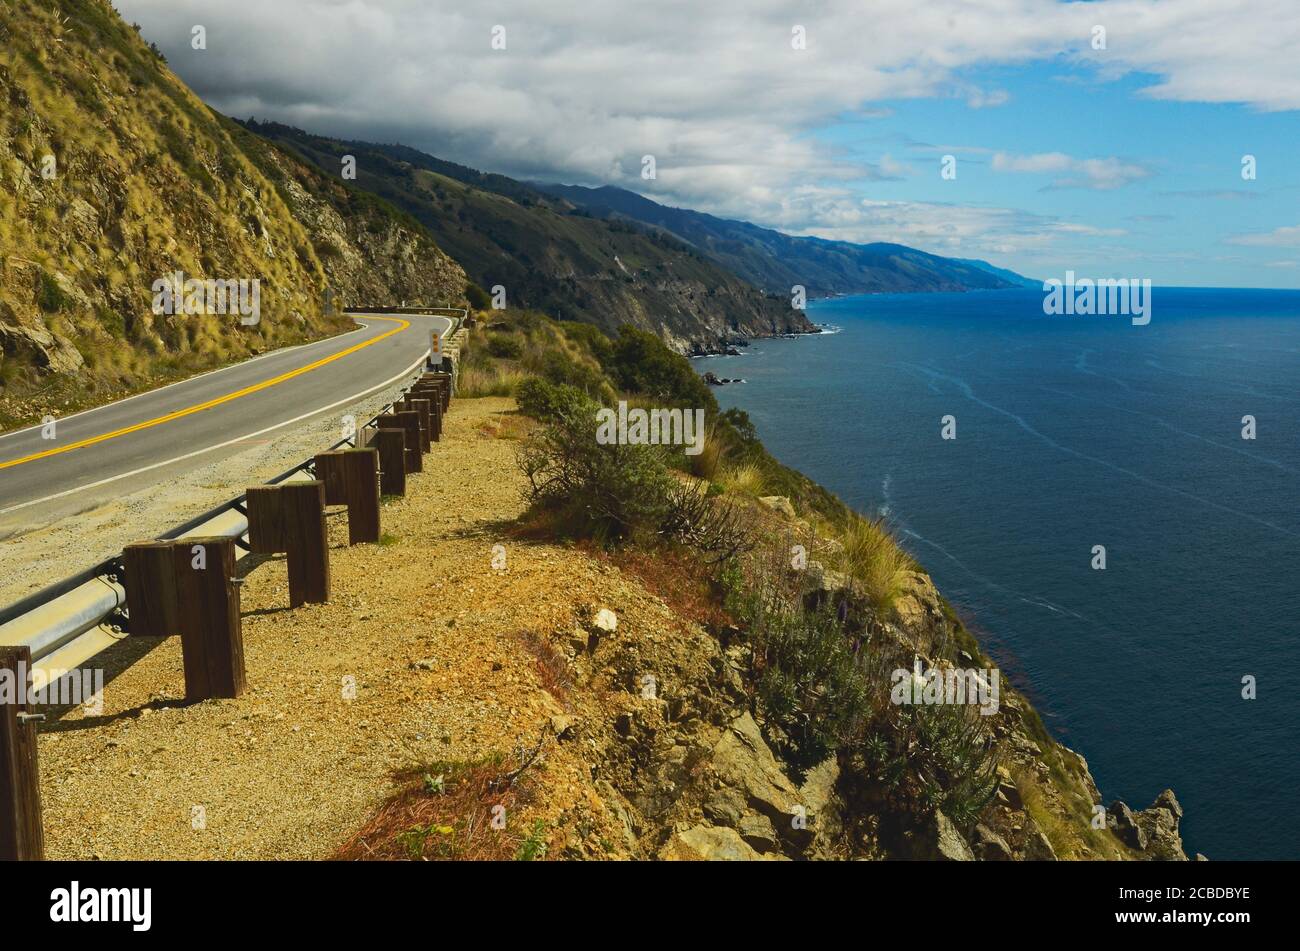 Wonder of nature, scenic panoramic of central California coast, near Big Sur, with curvy road, vivid color of mountains-coastline inspiring vista. Stock Photo